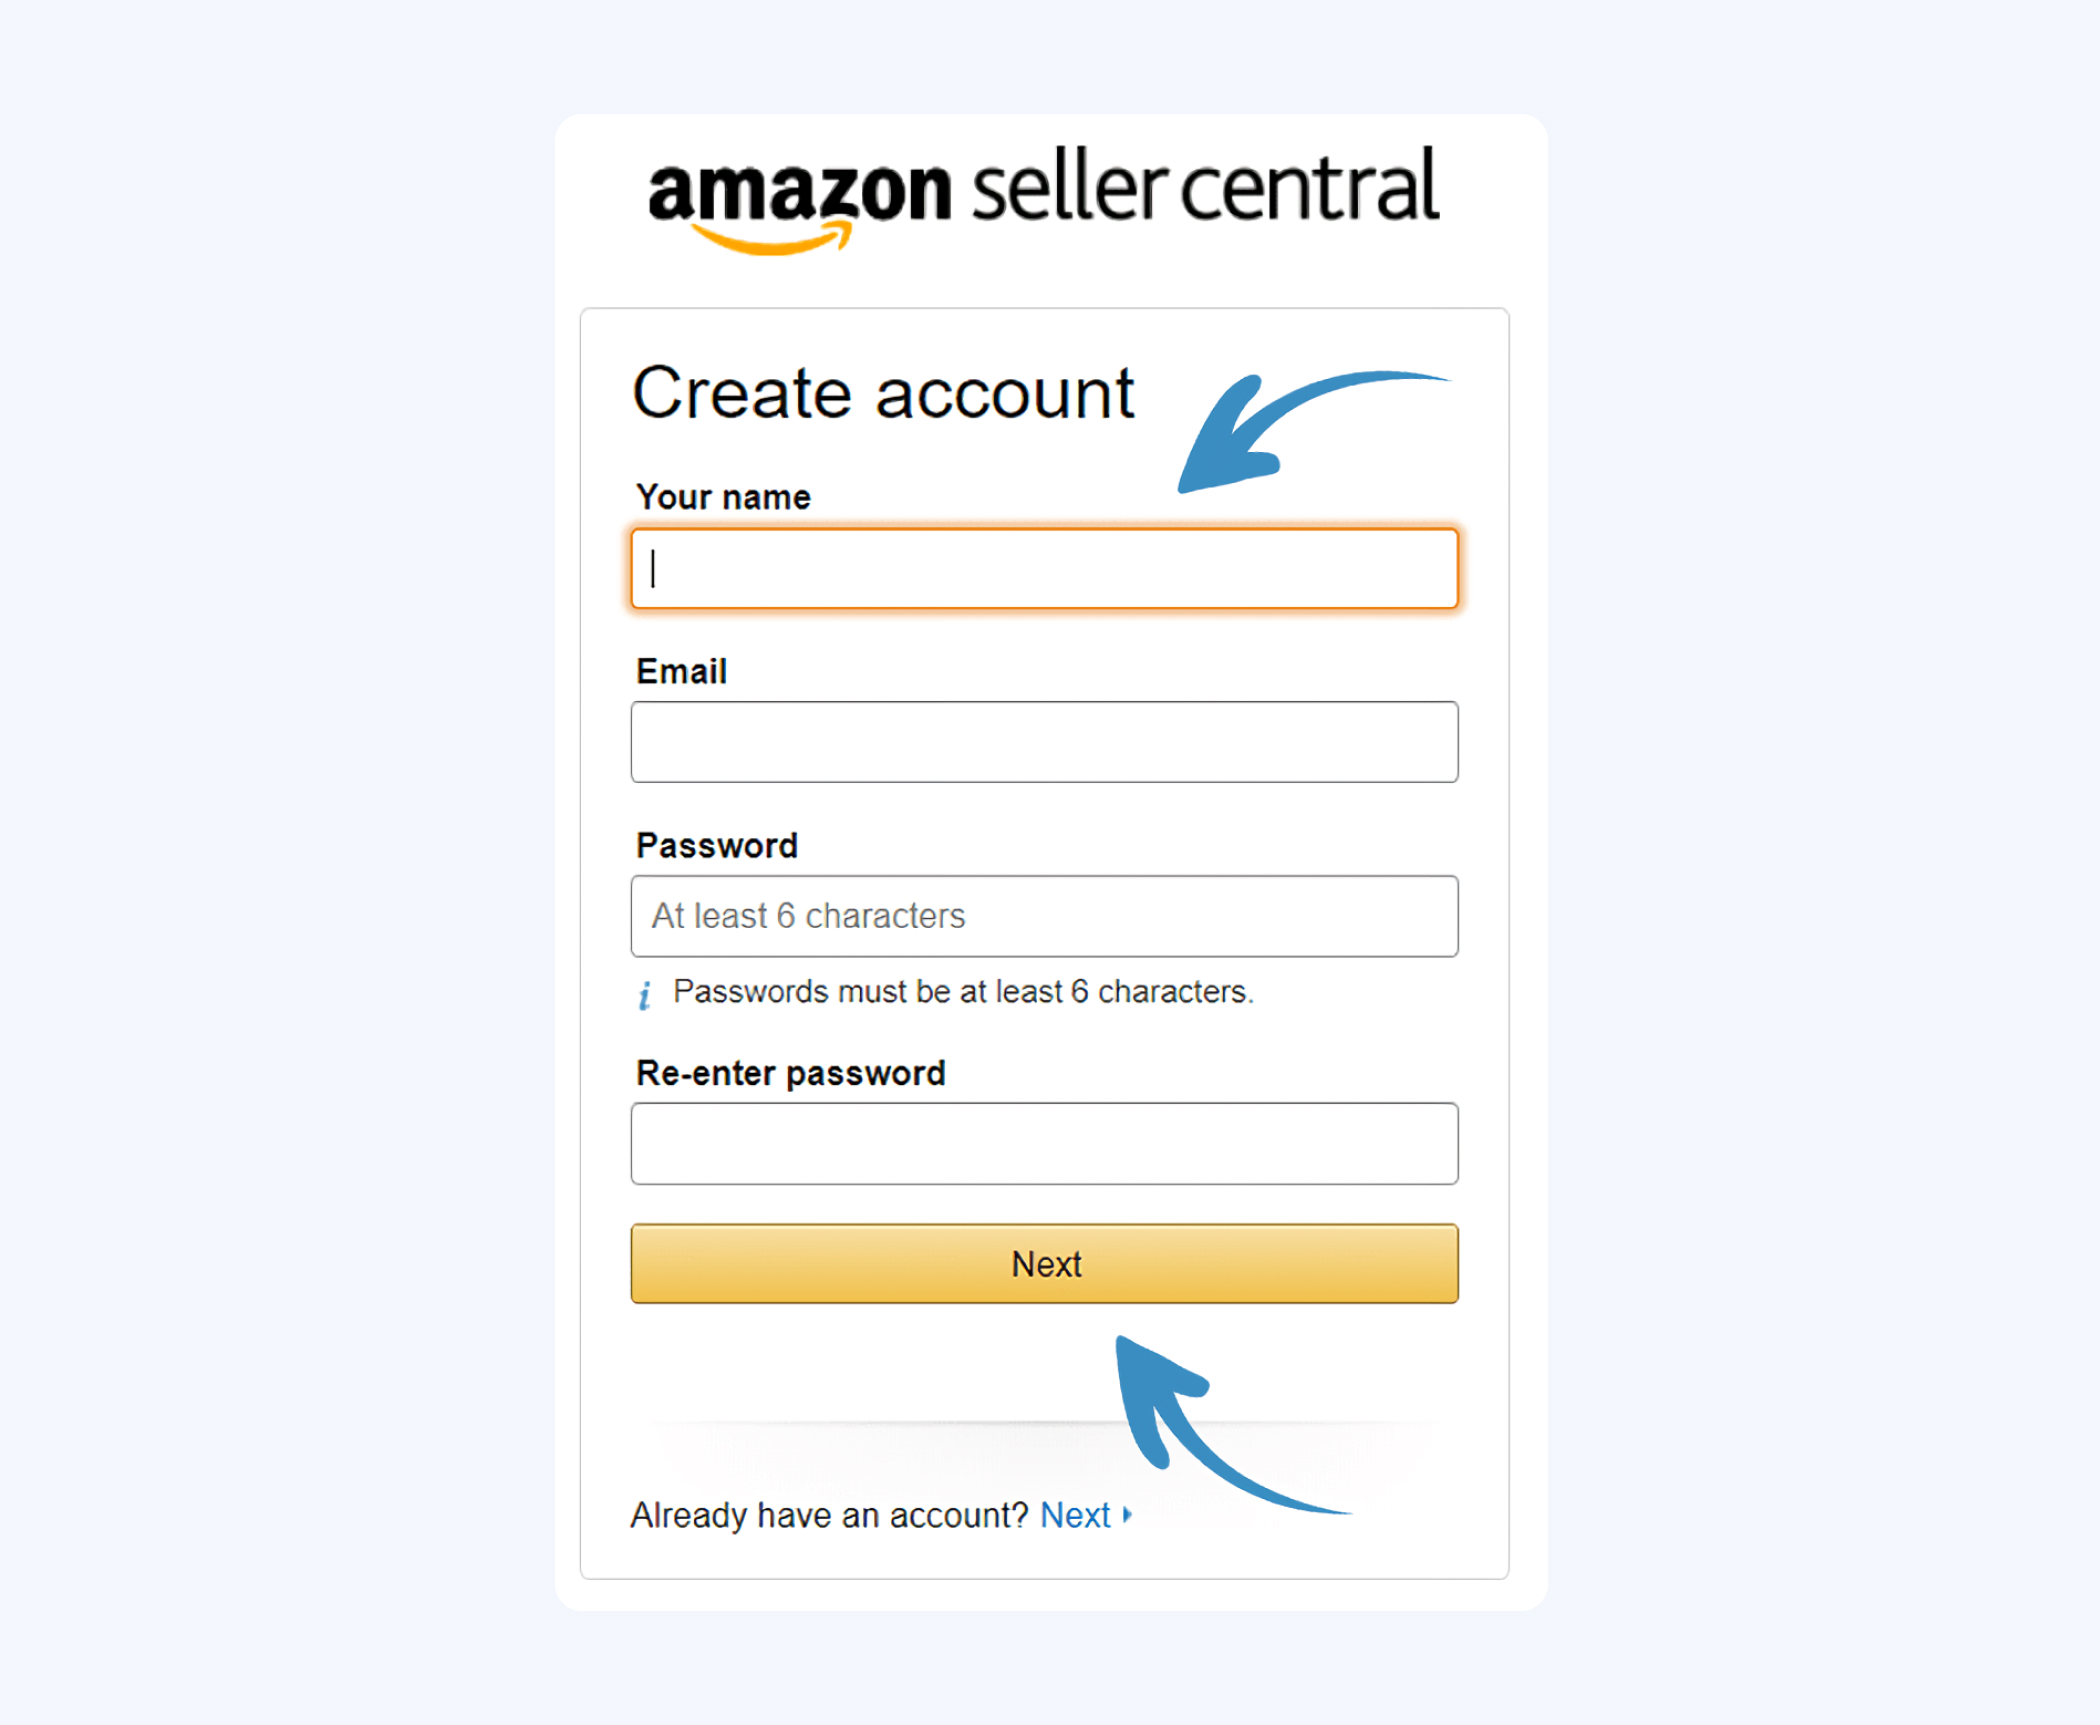 How to Create an Amazon Seller Account